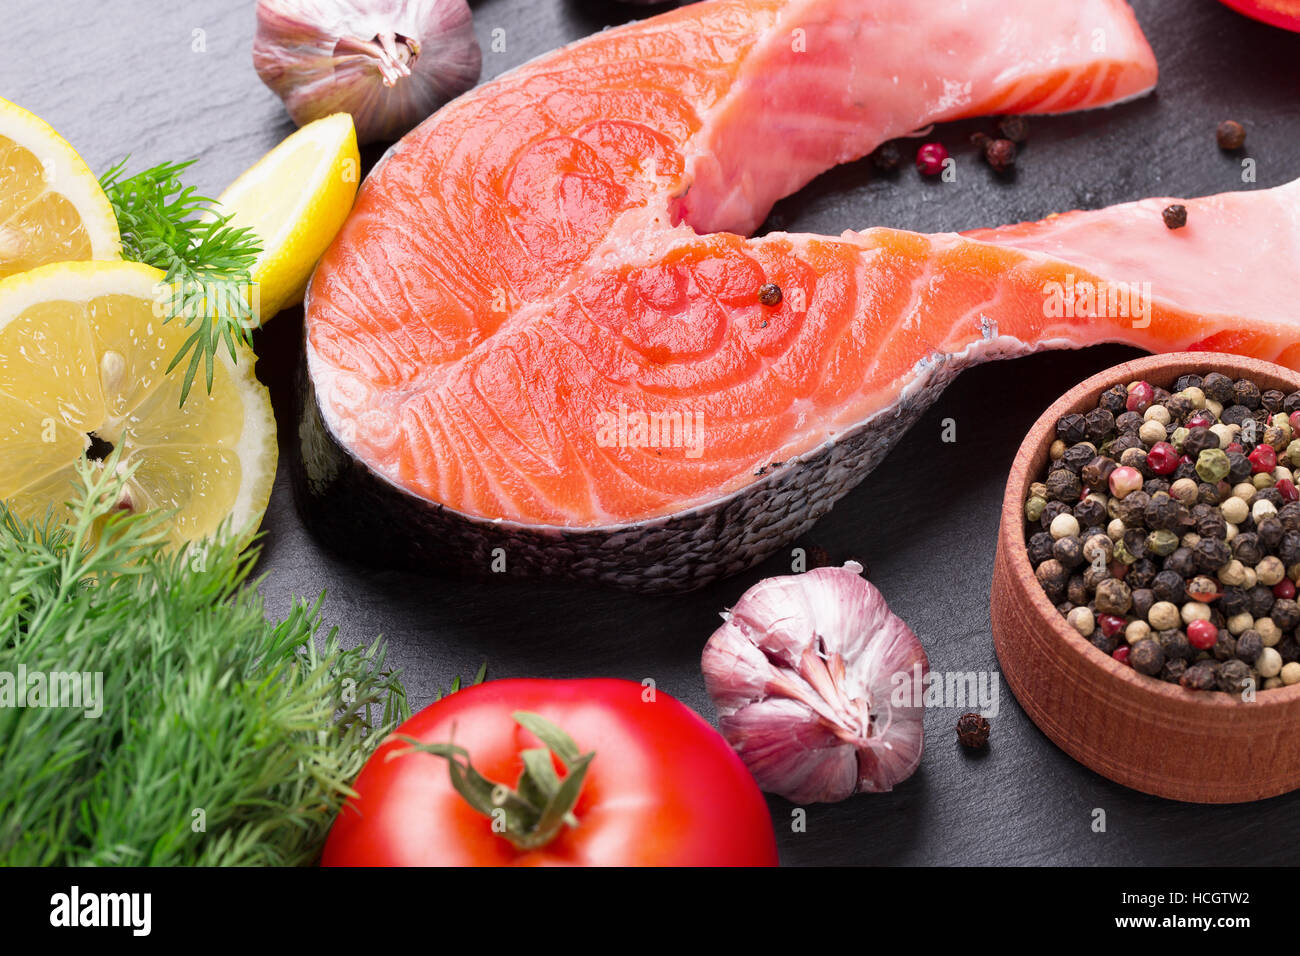 red fish steak with vegetables and spices on a slate table. Stock Photo